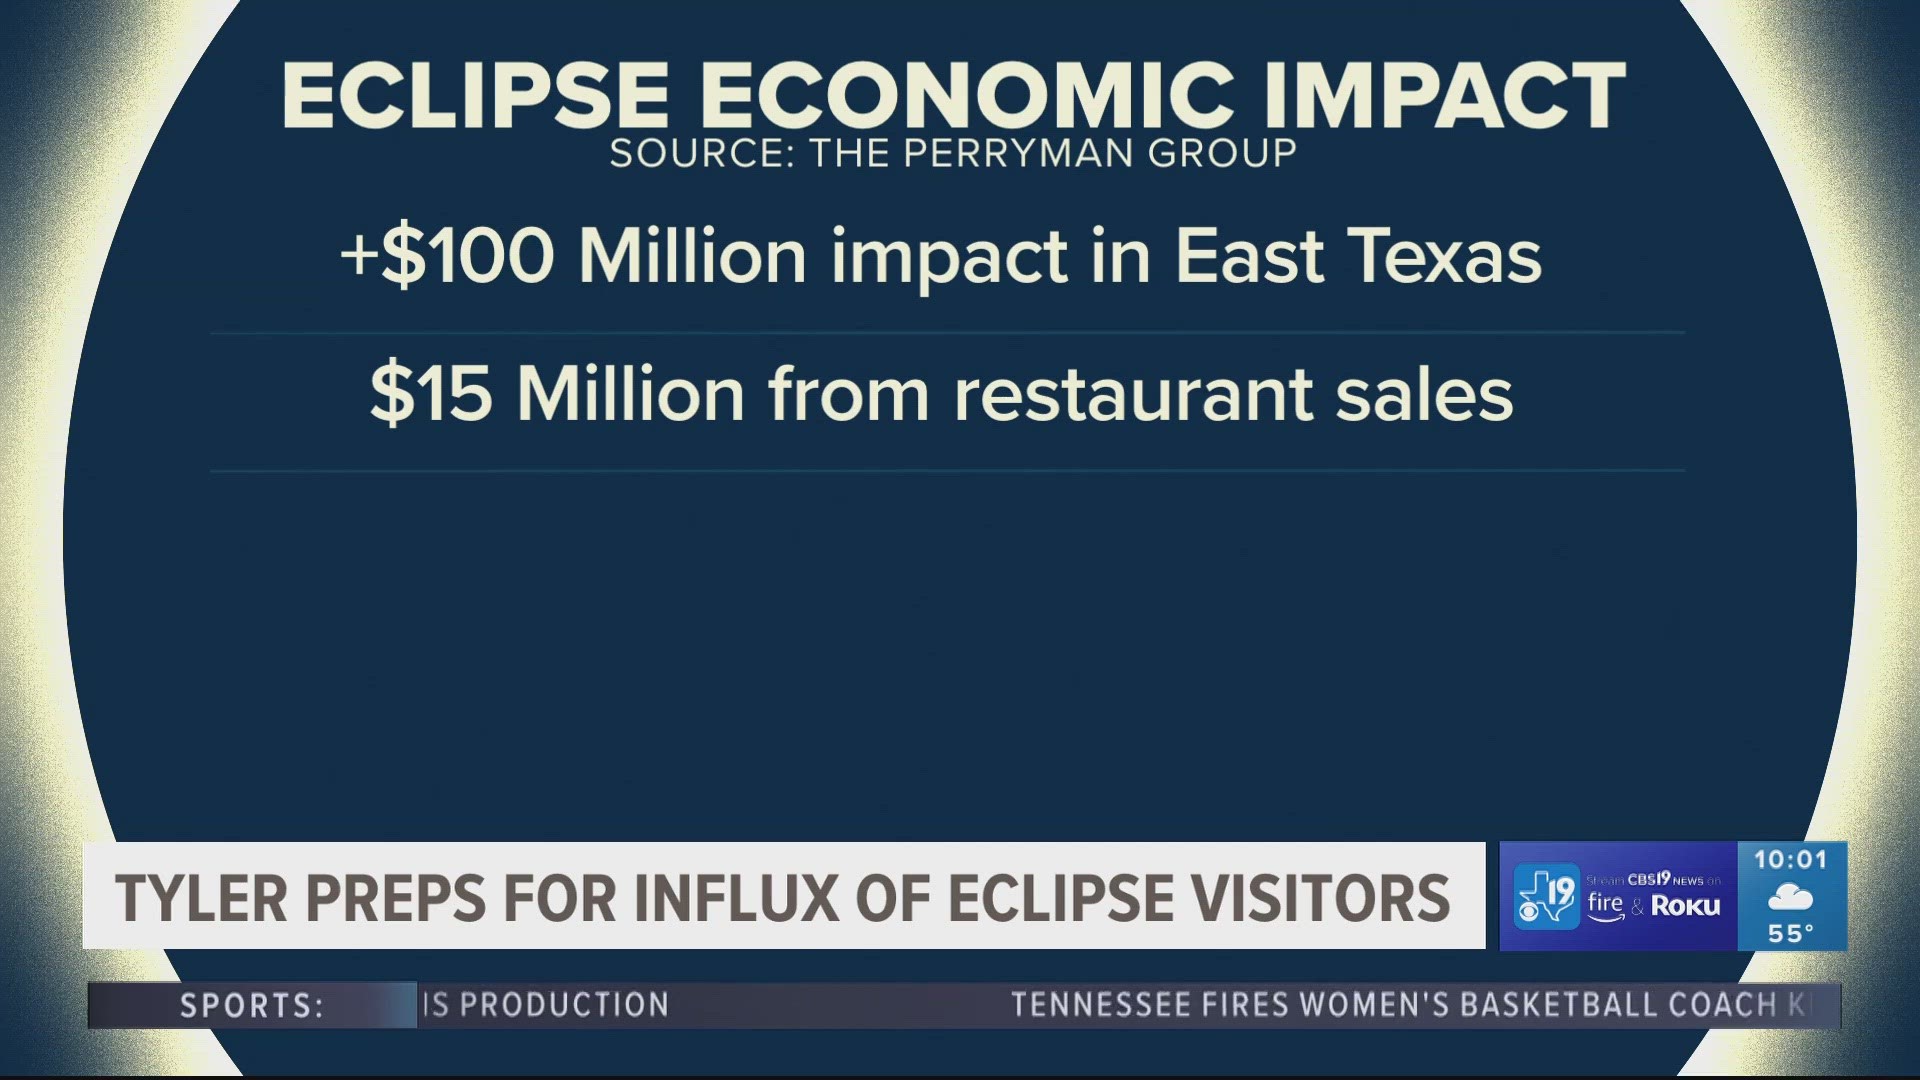 East Texas businesses get ready to take advantage of tourism coming with eclipse